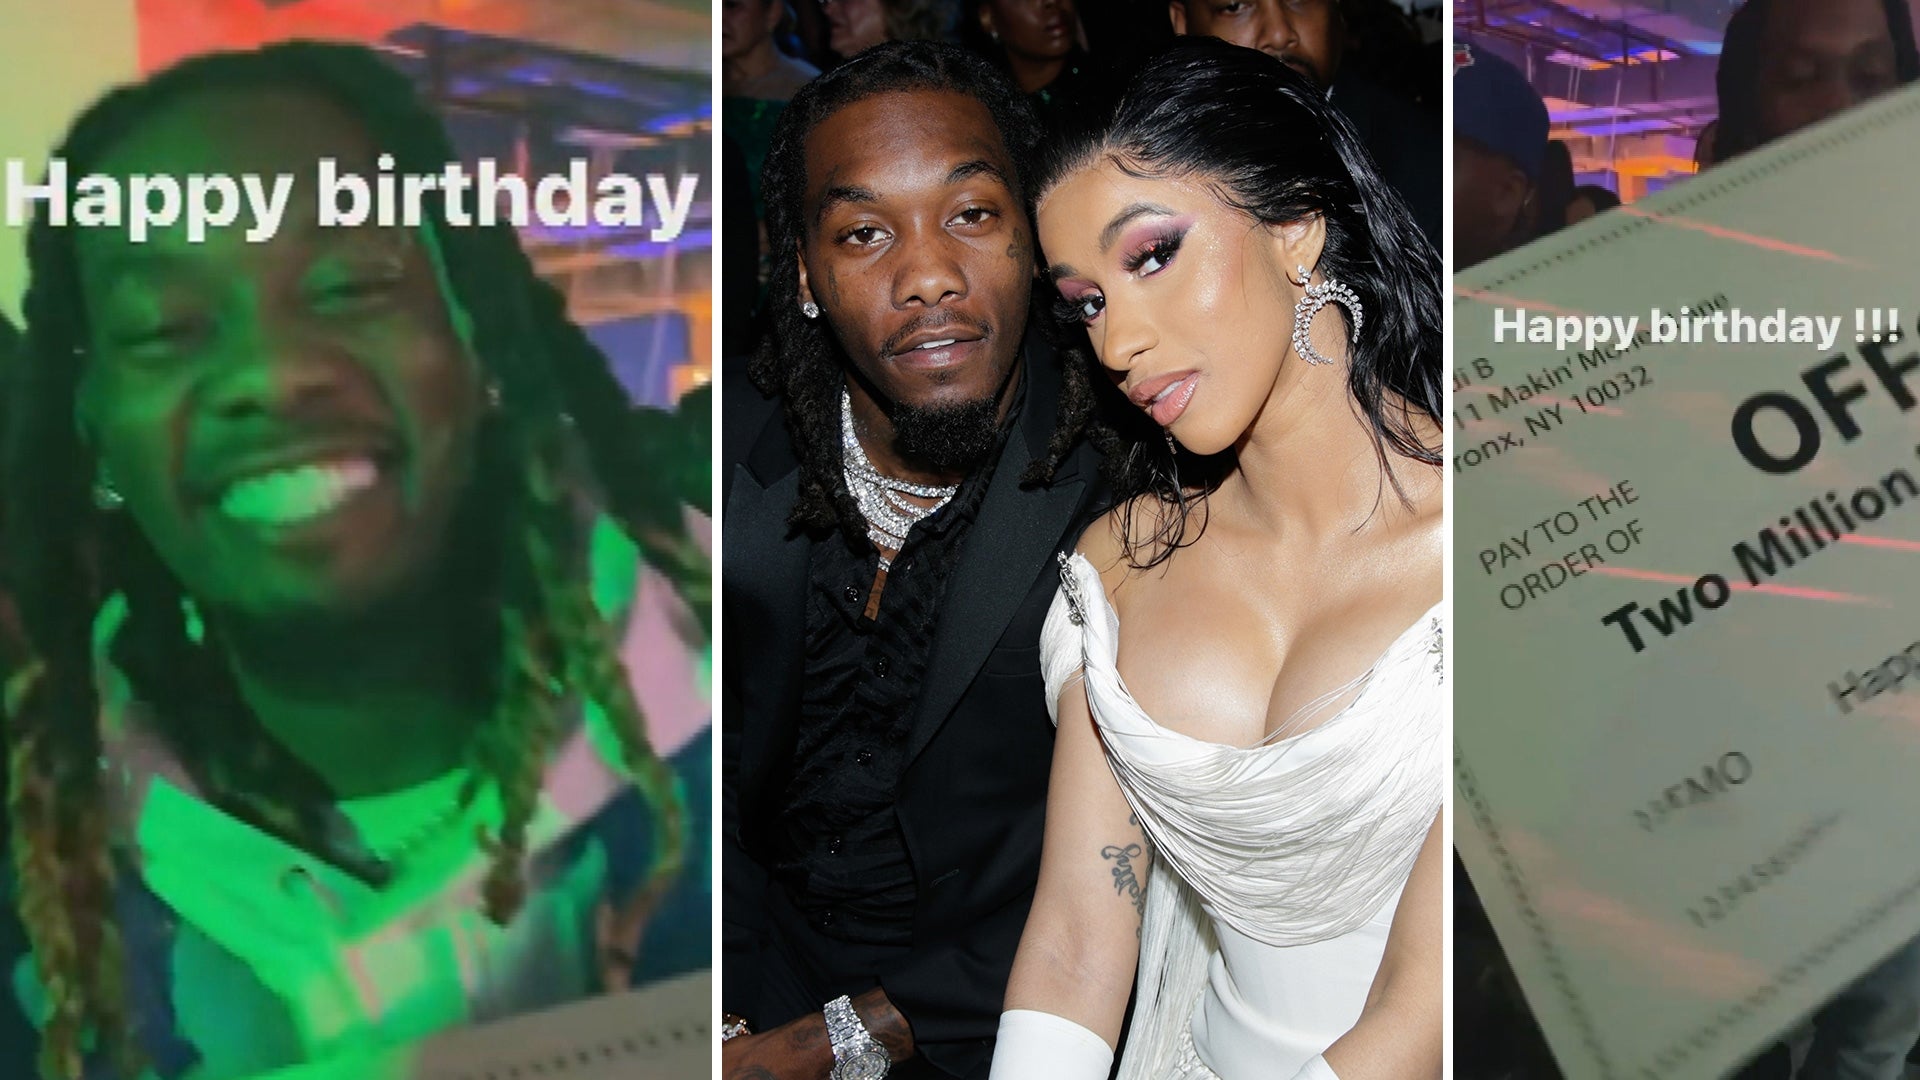 Offset pampers Cardi B with $375K watch and 6 expensive bags as Vals Day  gift (VIDEO)